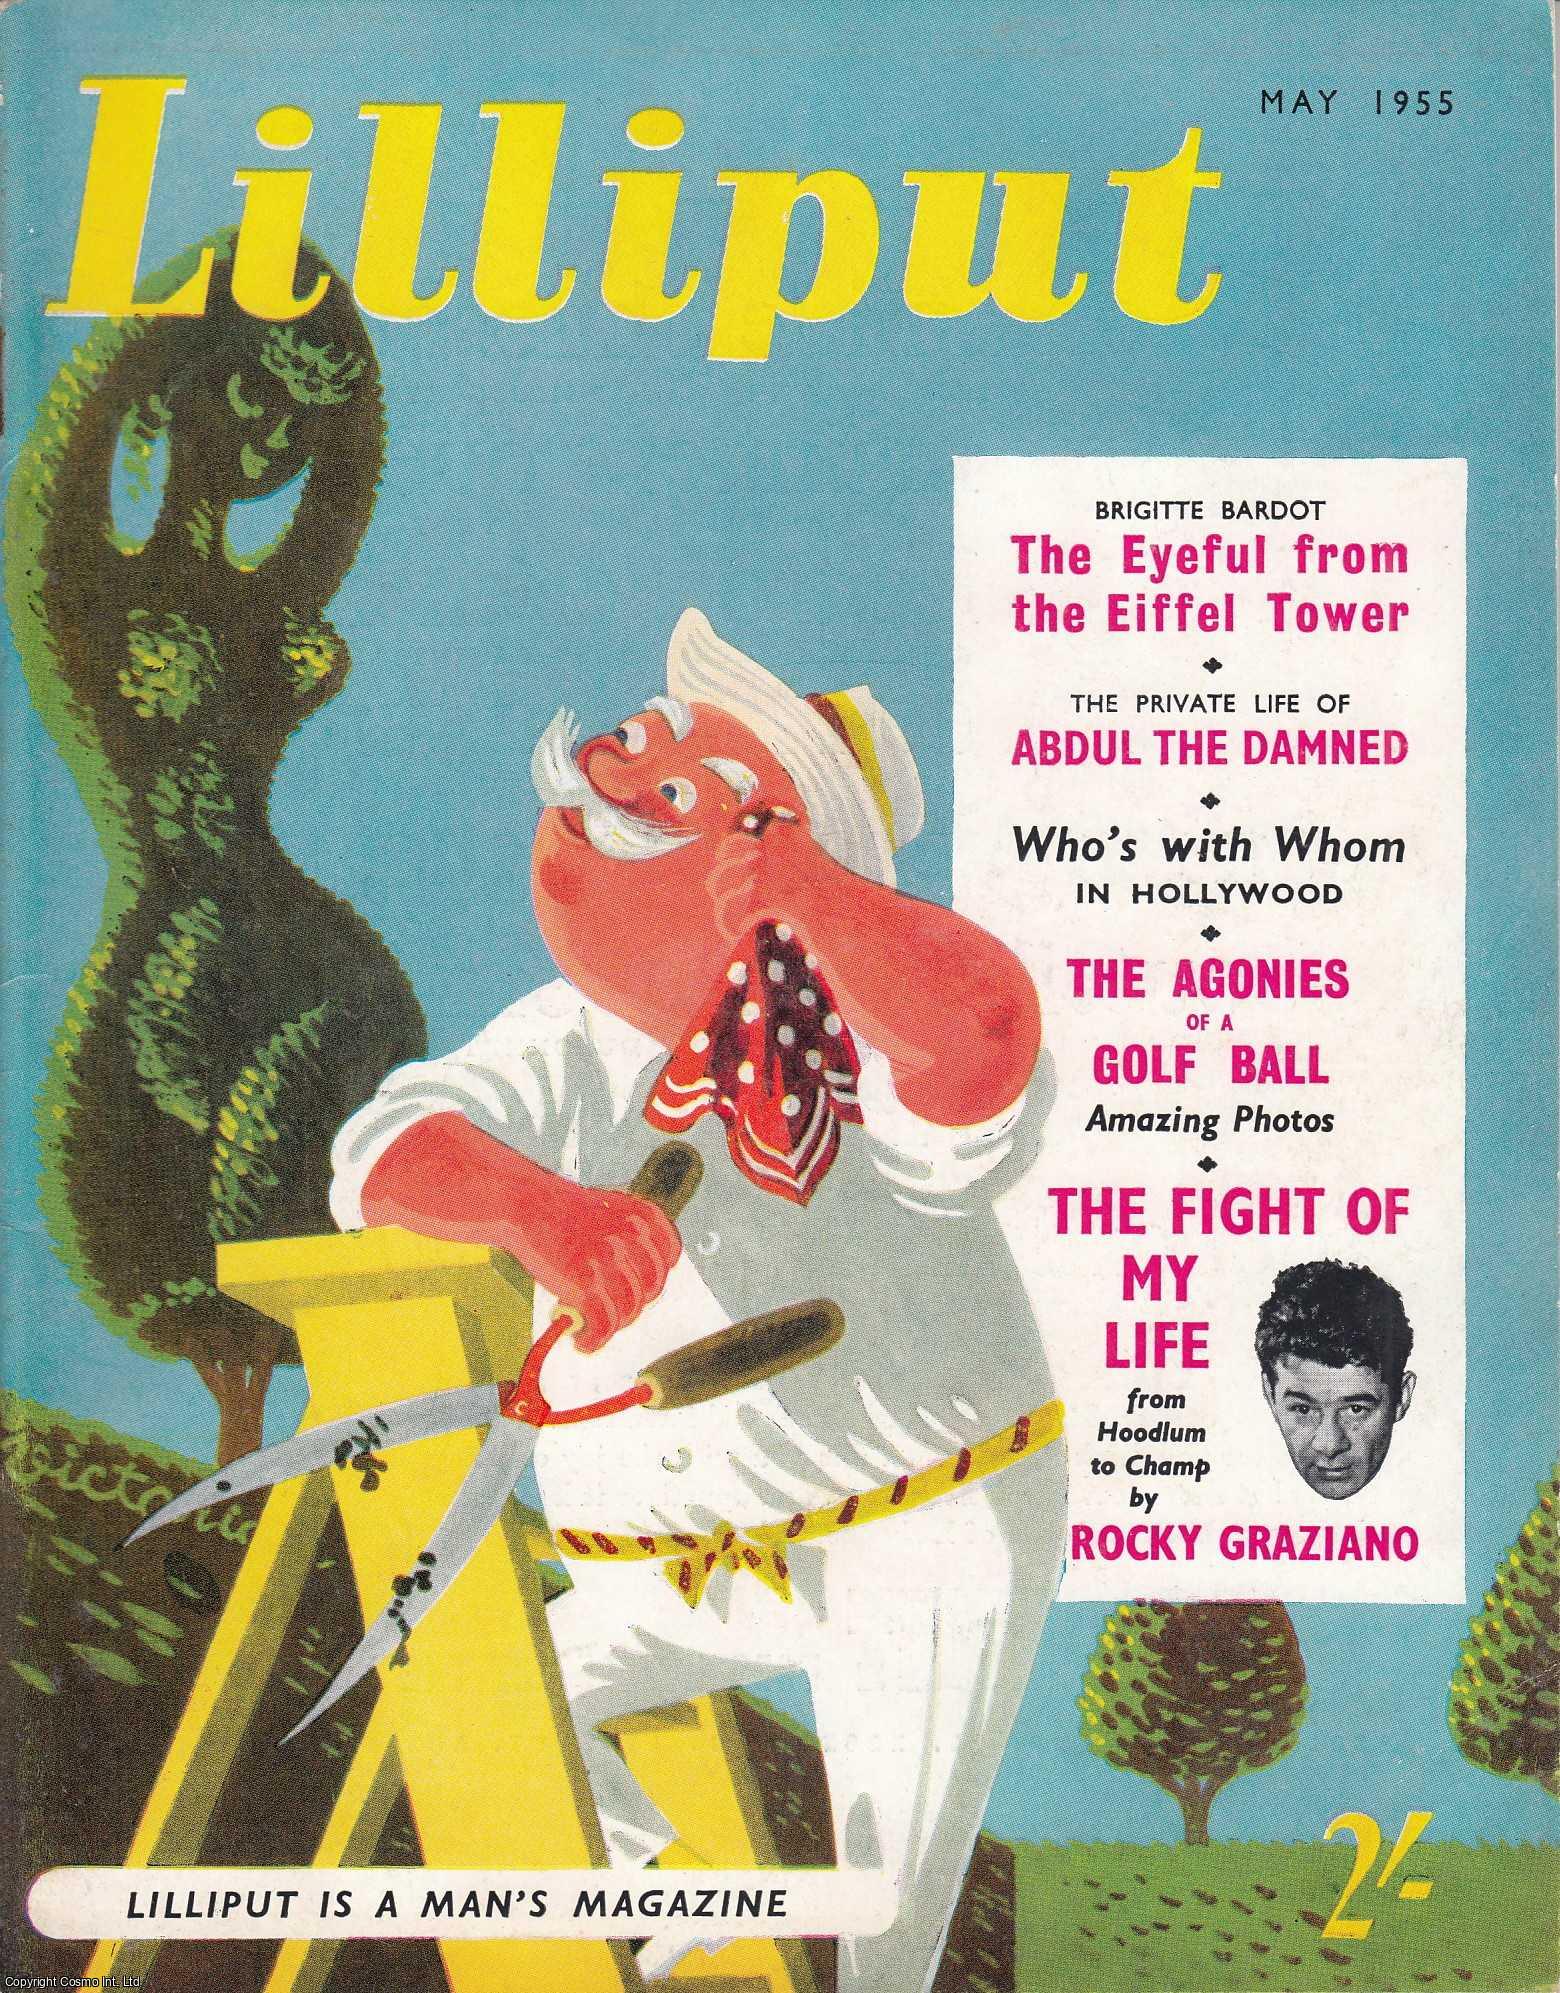 Lilliput - Lilliput Magazine. May 1955. Vol.36 no.5 Issue no.215. John Prebble, Patrick Campbell, Geoffrey Willians, and other pieces.